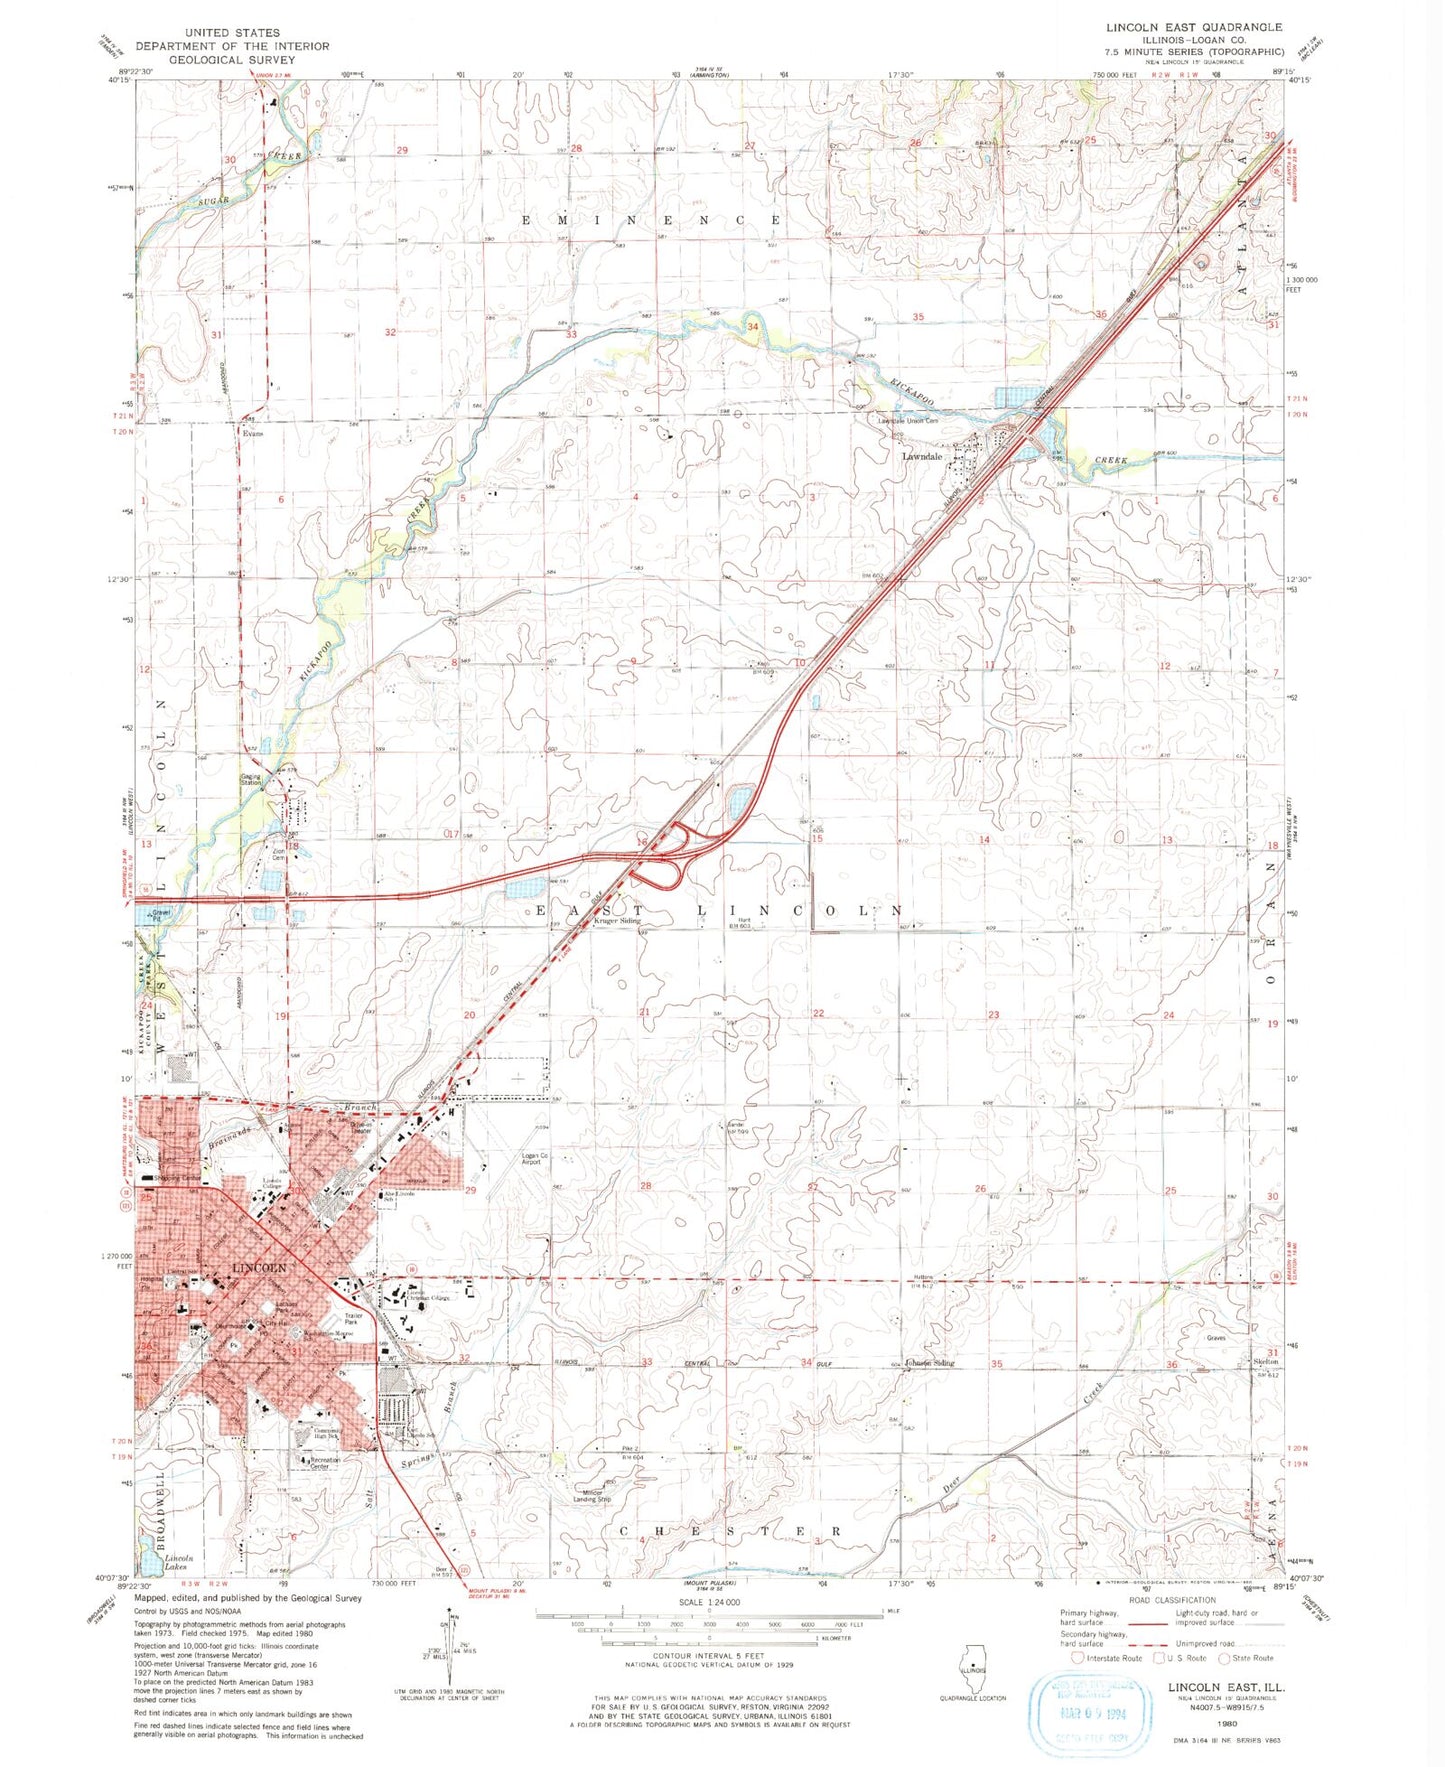 Classic USGS Lincoln East Illinois 7.5'x7.5' Topo Map Image